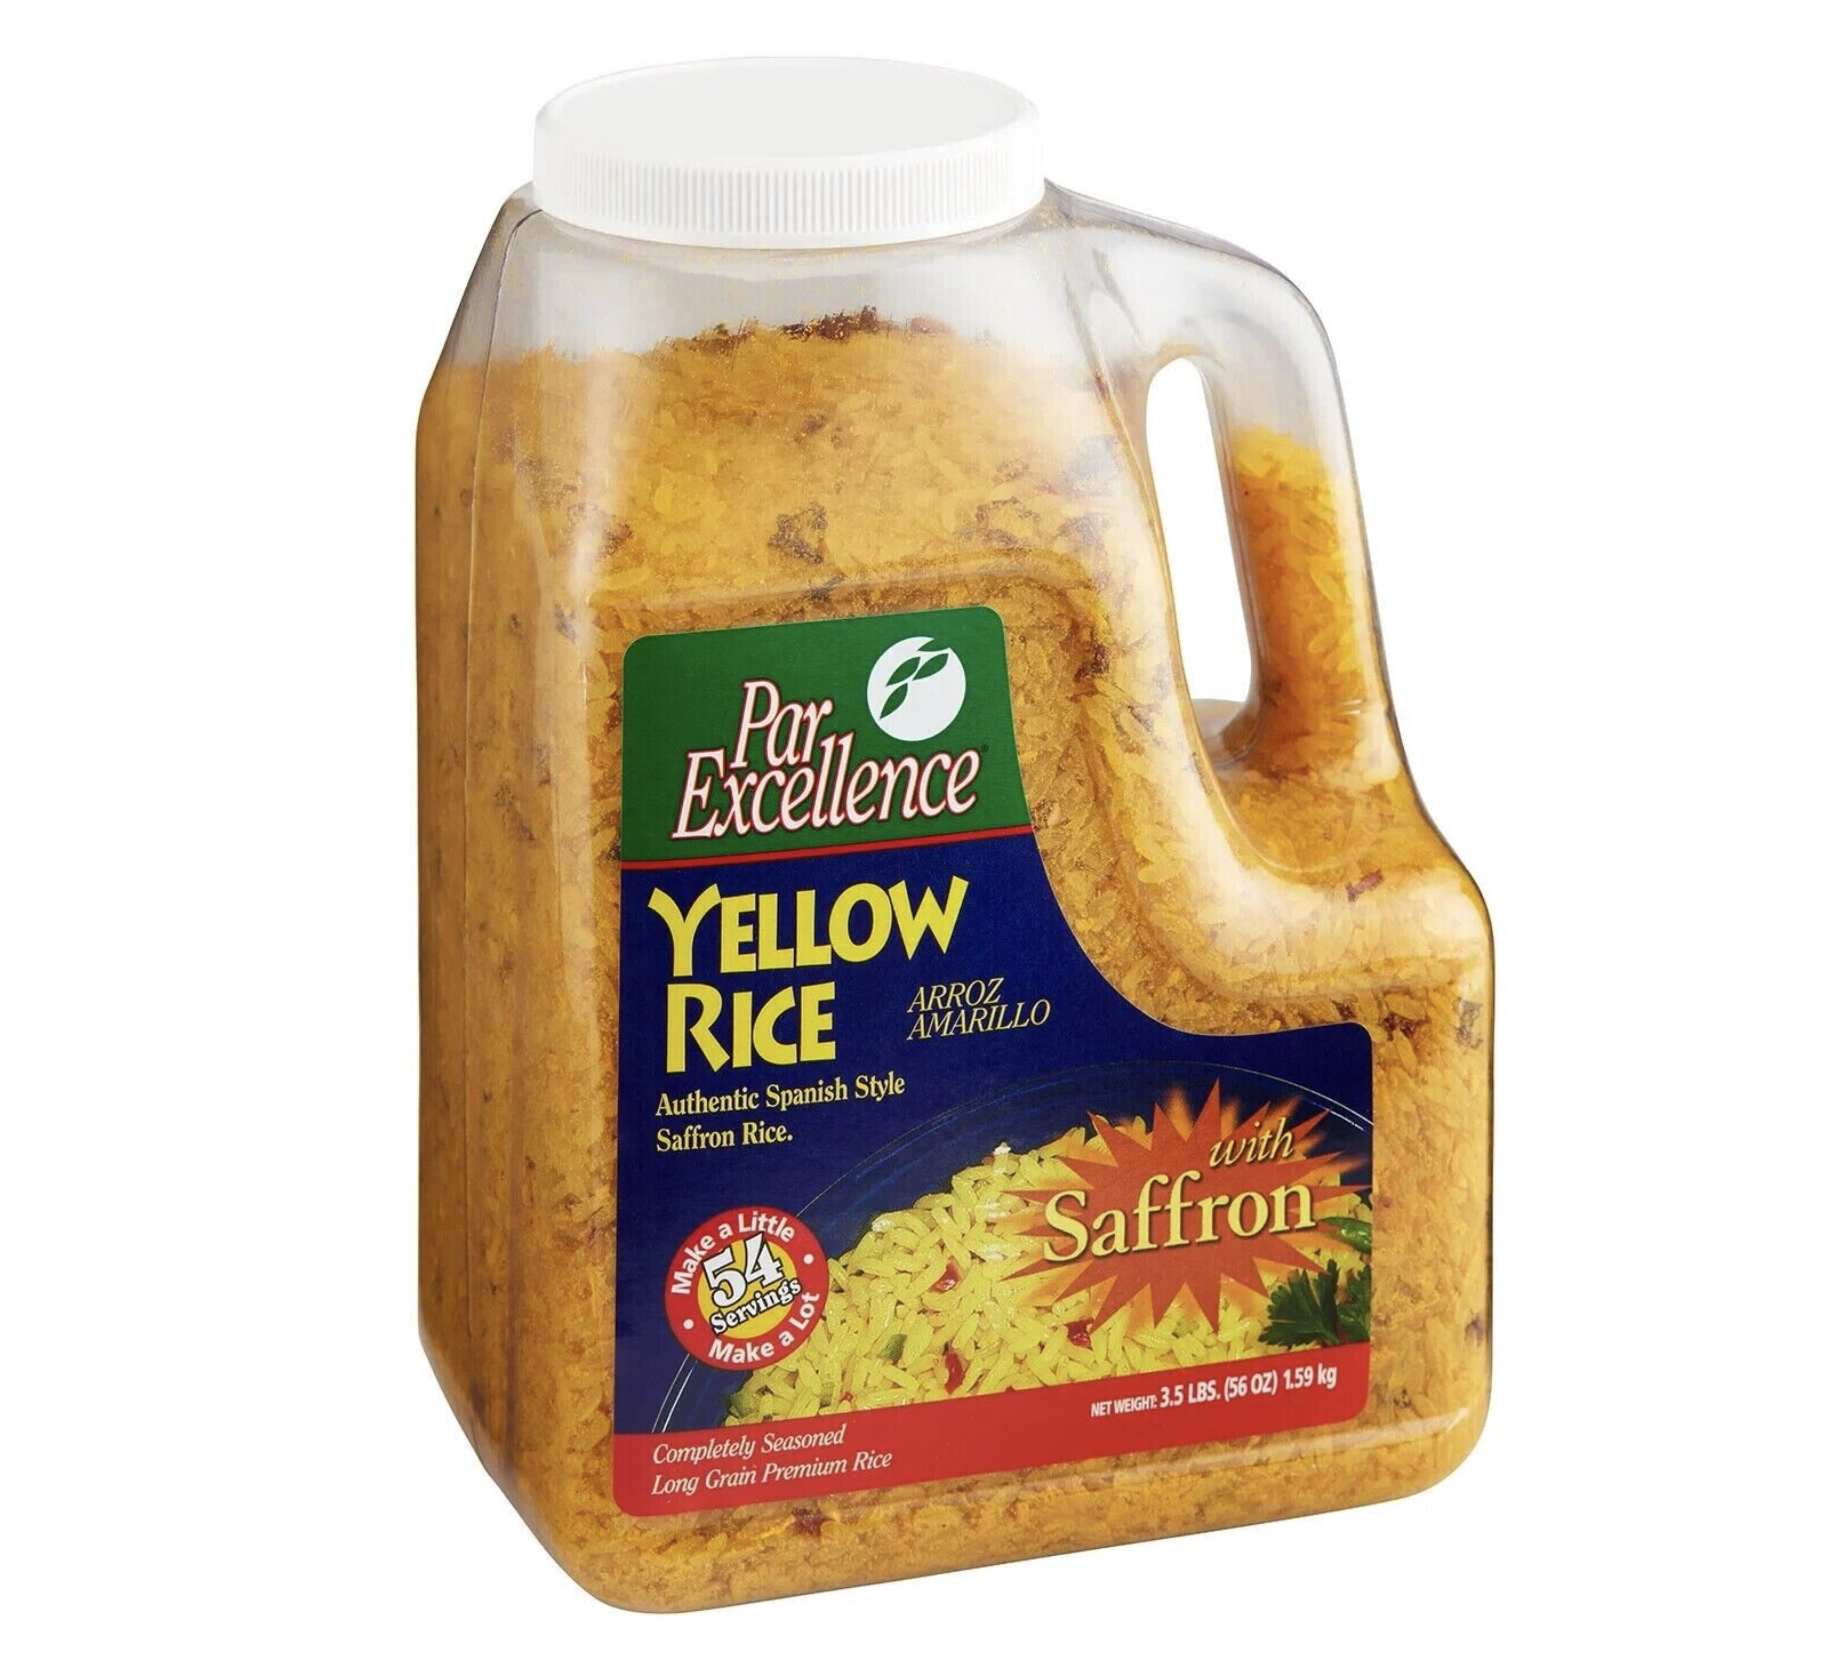 Parexcellence yellow rice {3.5 lbs.} free shipping in usa